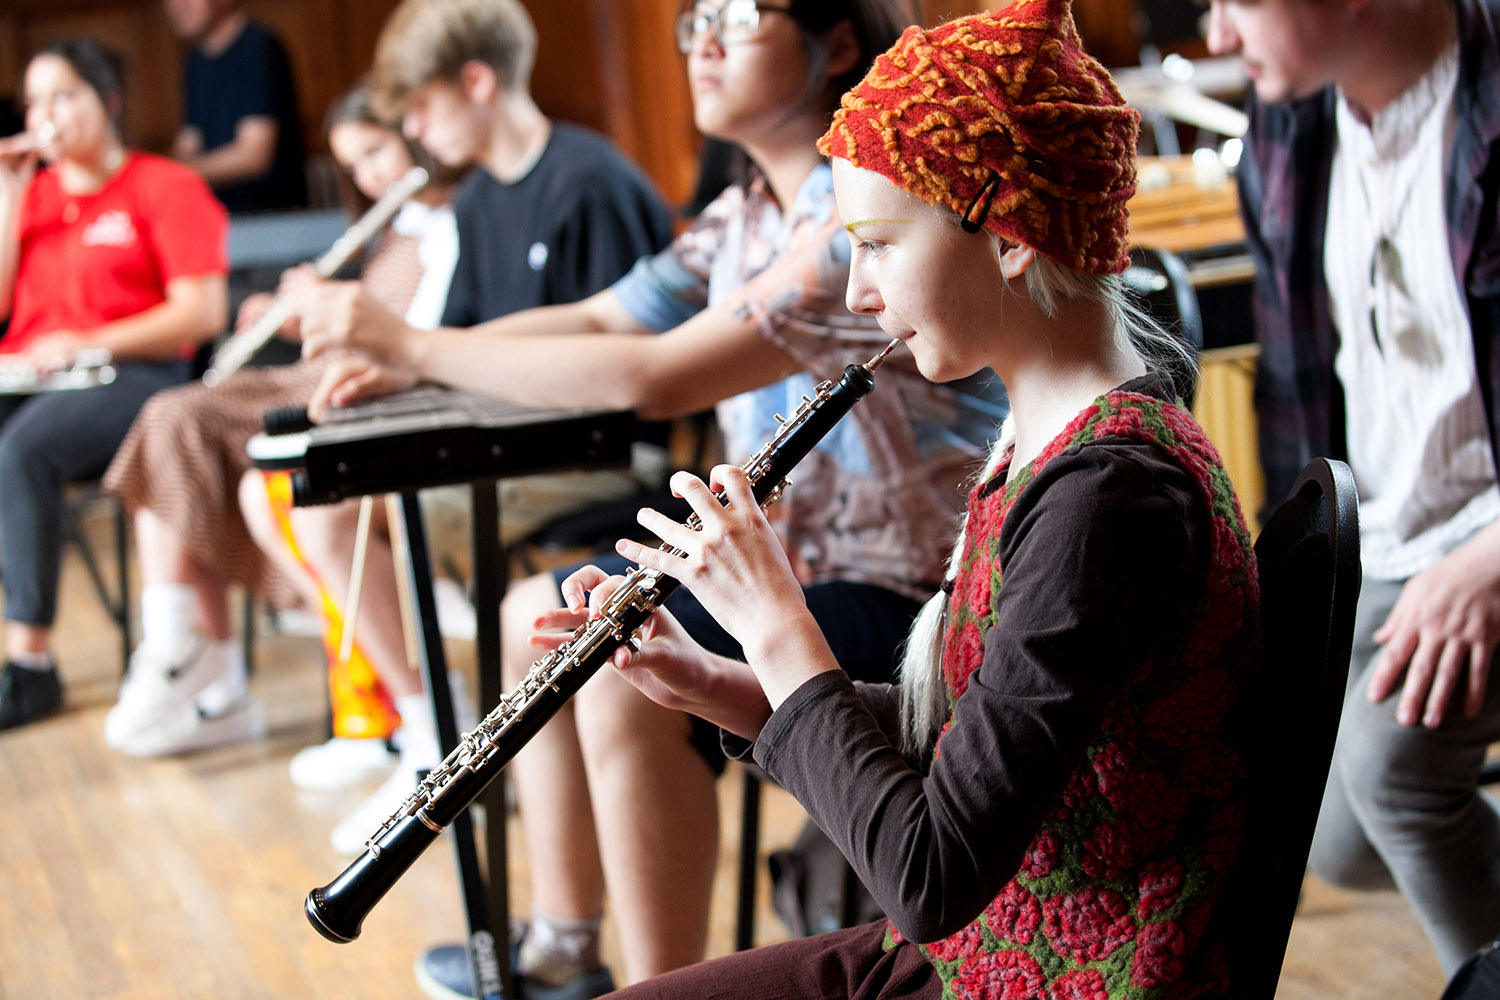 A young musician wearing a hat plays an oboe with other young musicians playing different instruments in the background